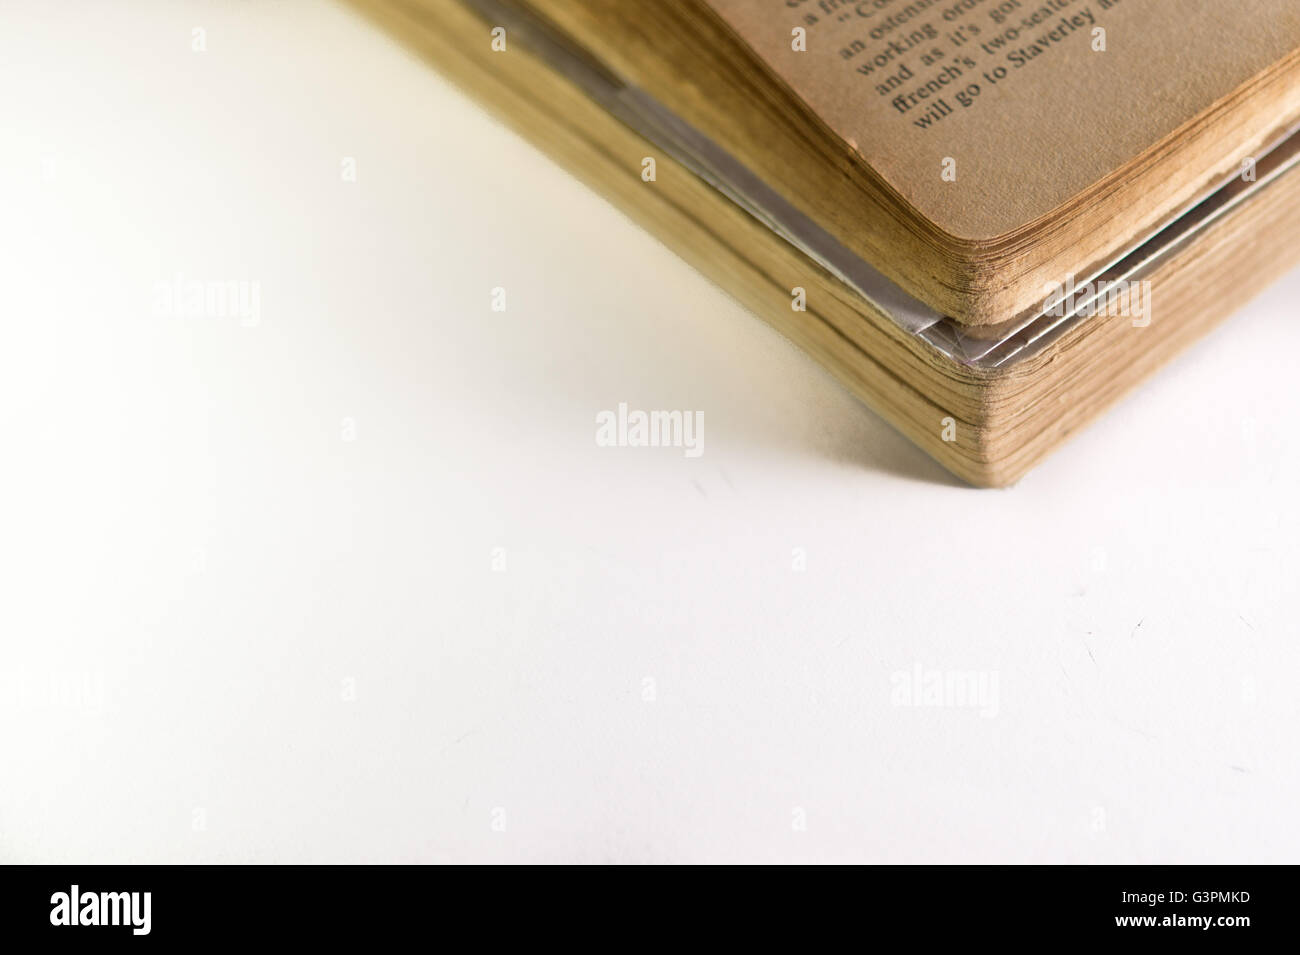 Old ancient book on white background Stock Photo